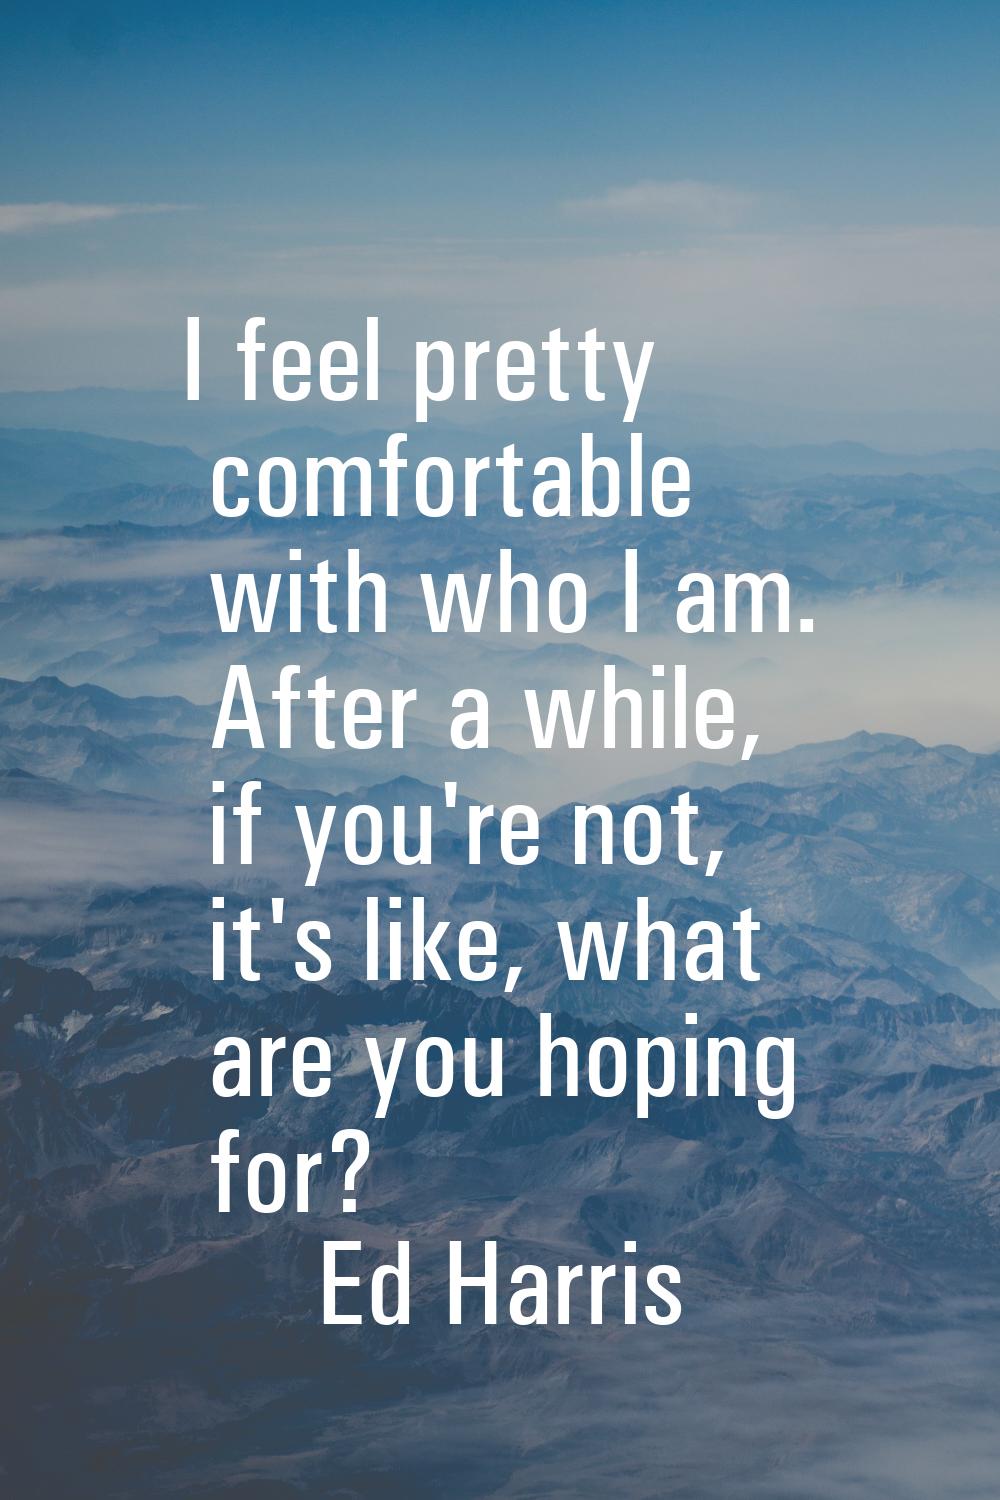 I feel pretty comfortable with who I am. After a while, if you're not, it's like, what are you hopi